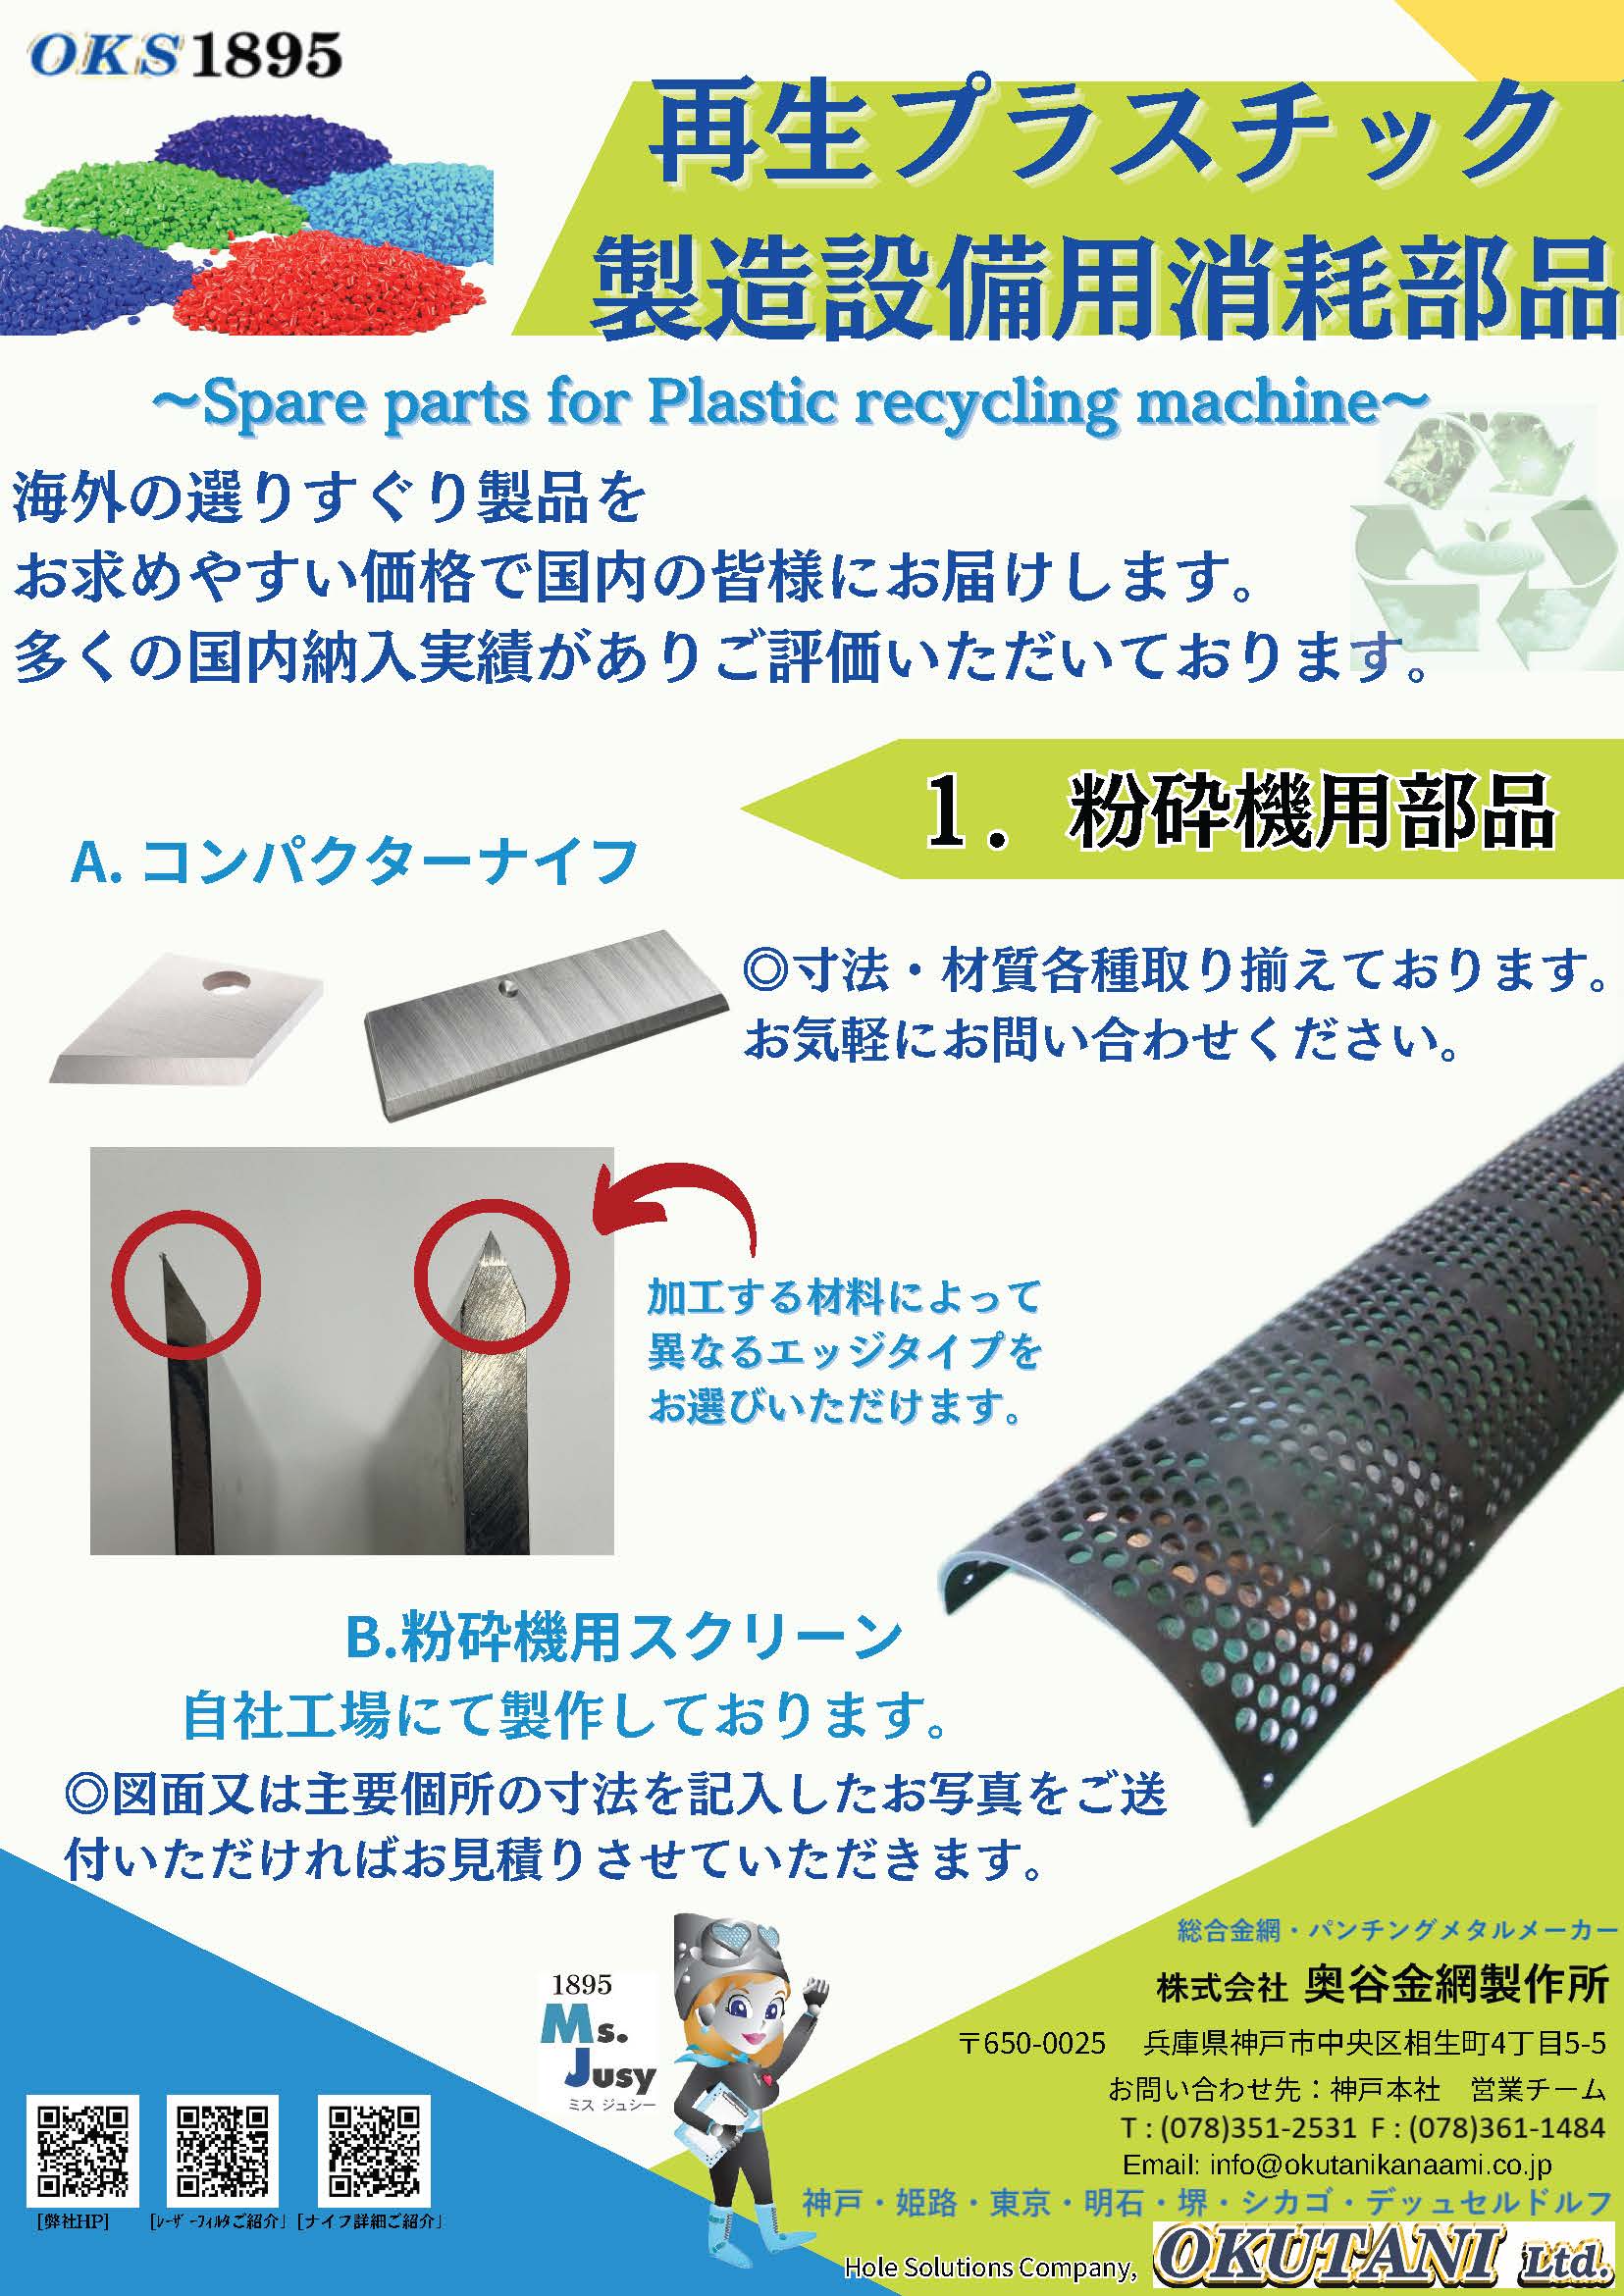 Spare parts for Plastic recycling machine